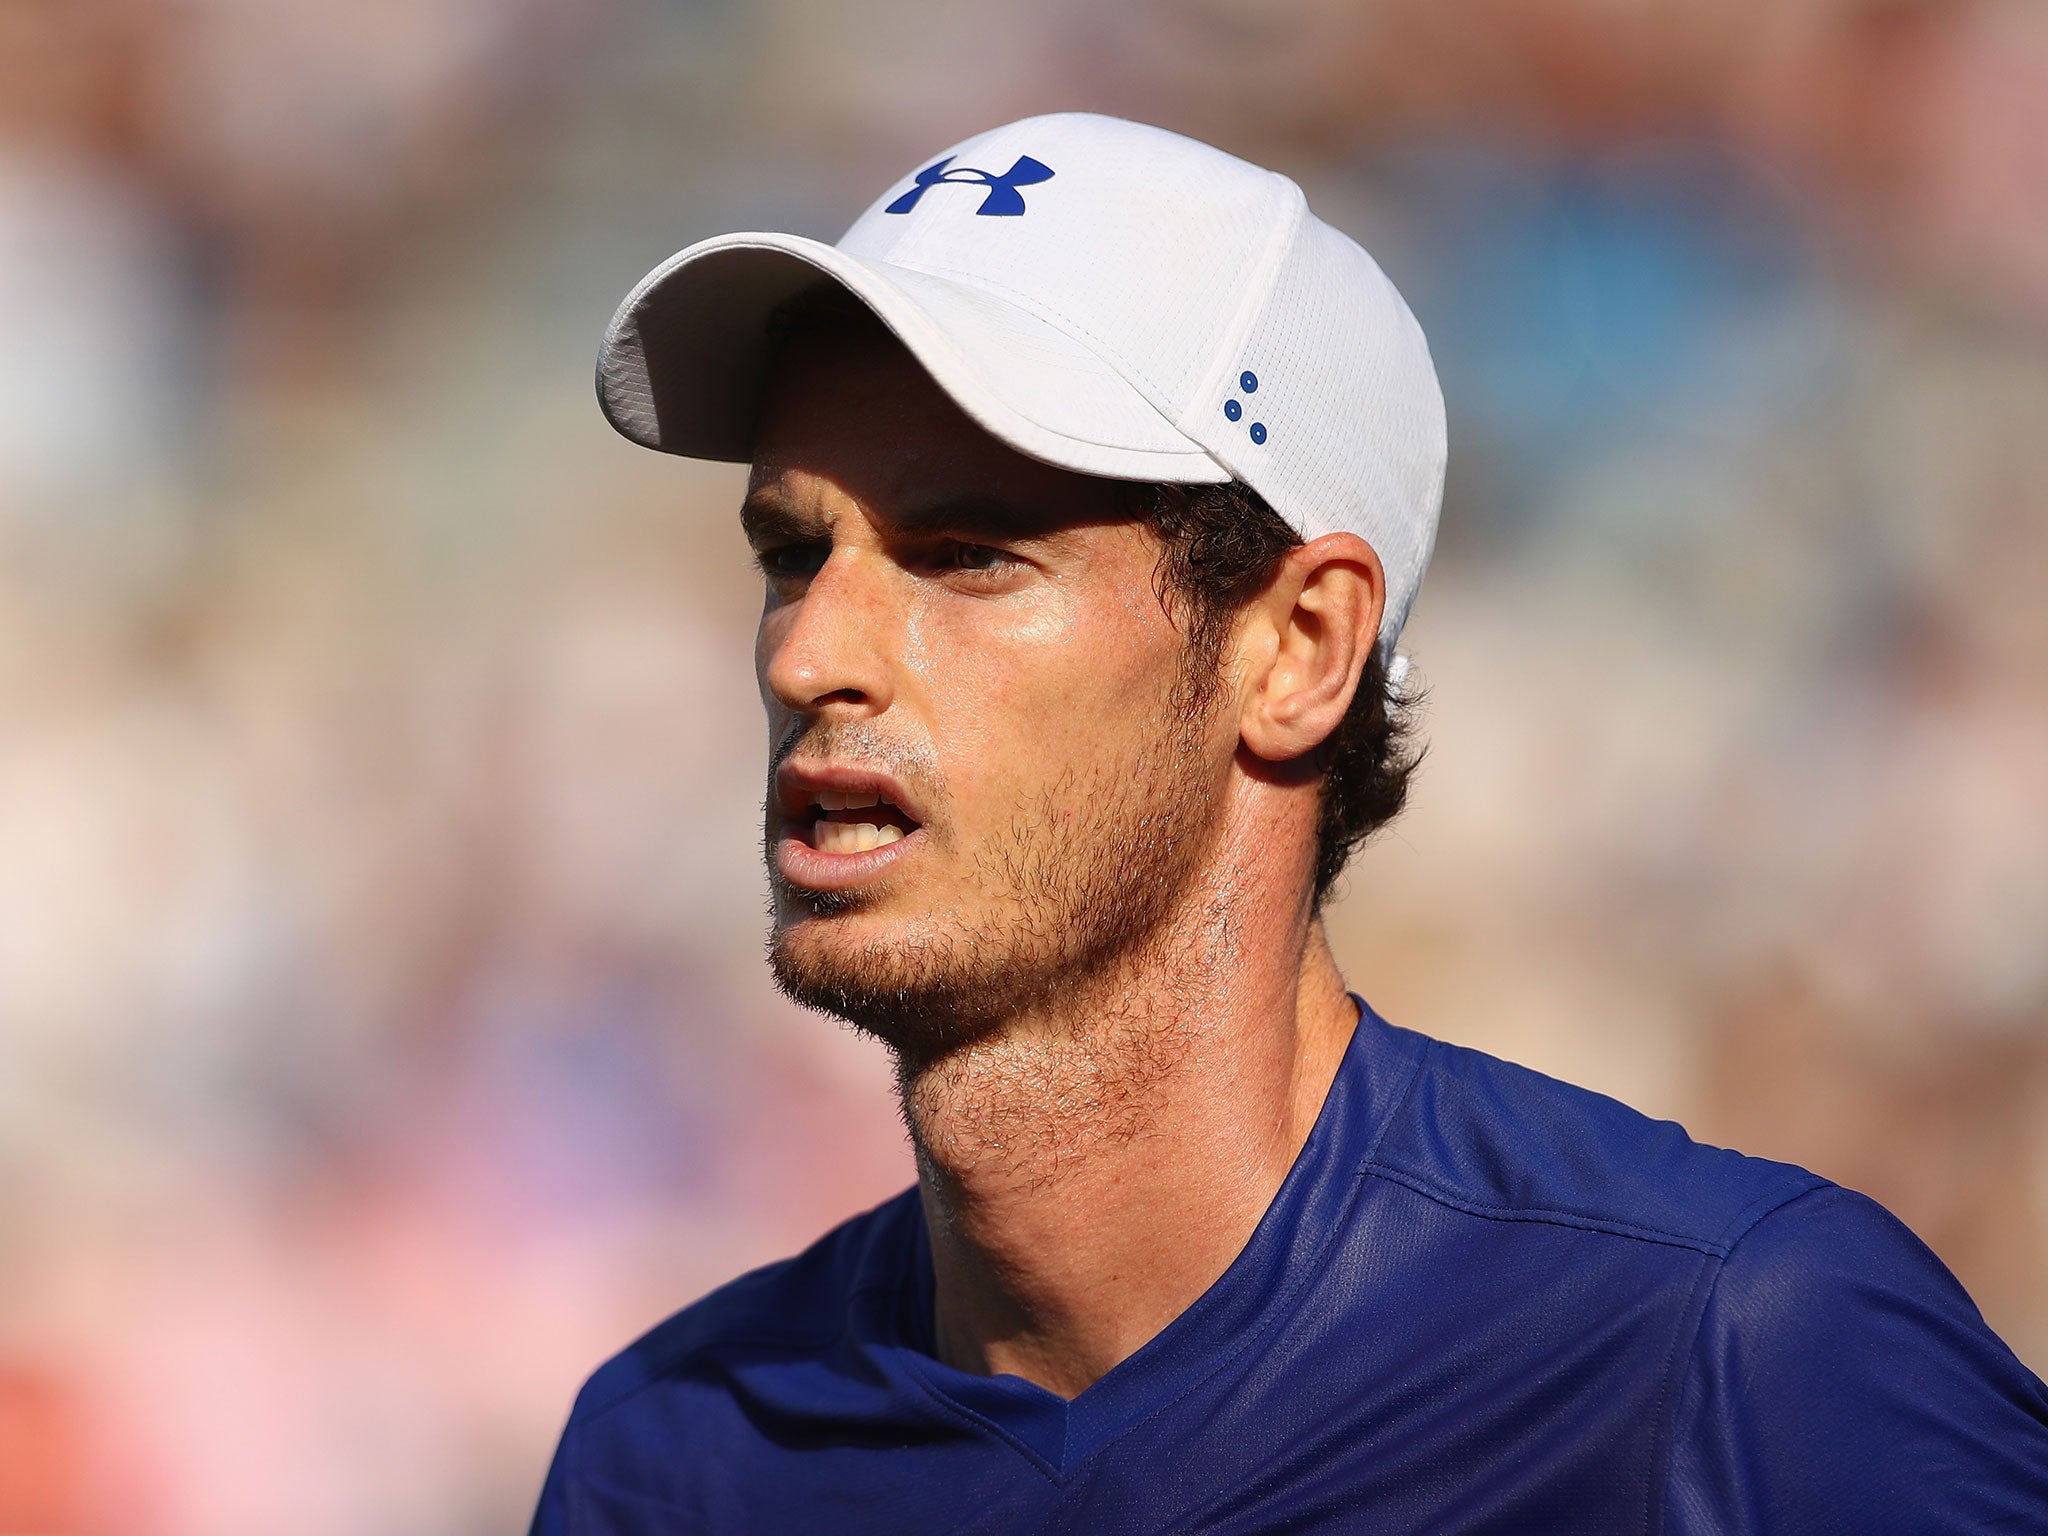 Murray is still expected to perform well at Wimbledon